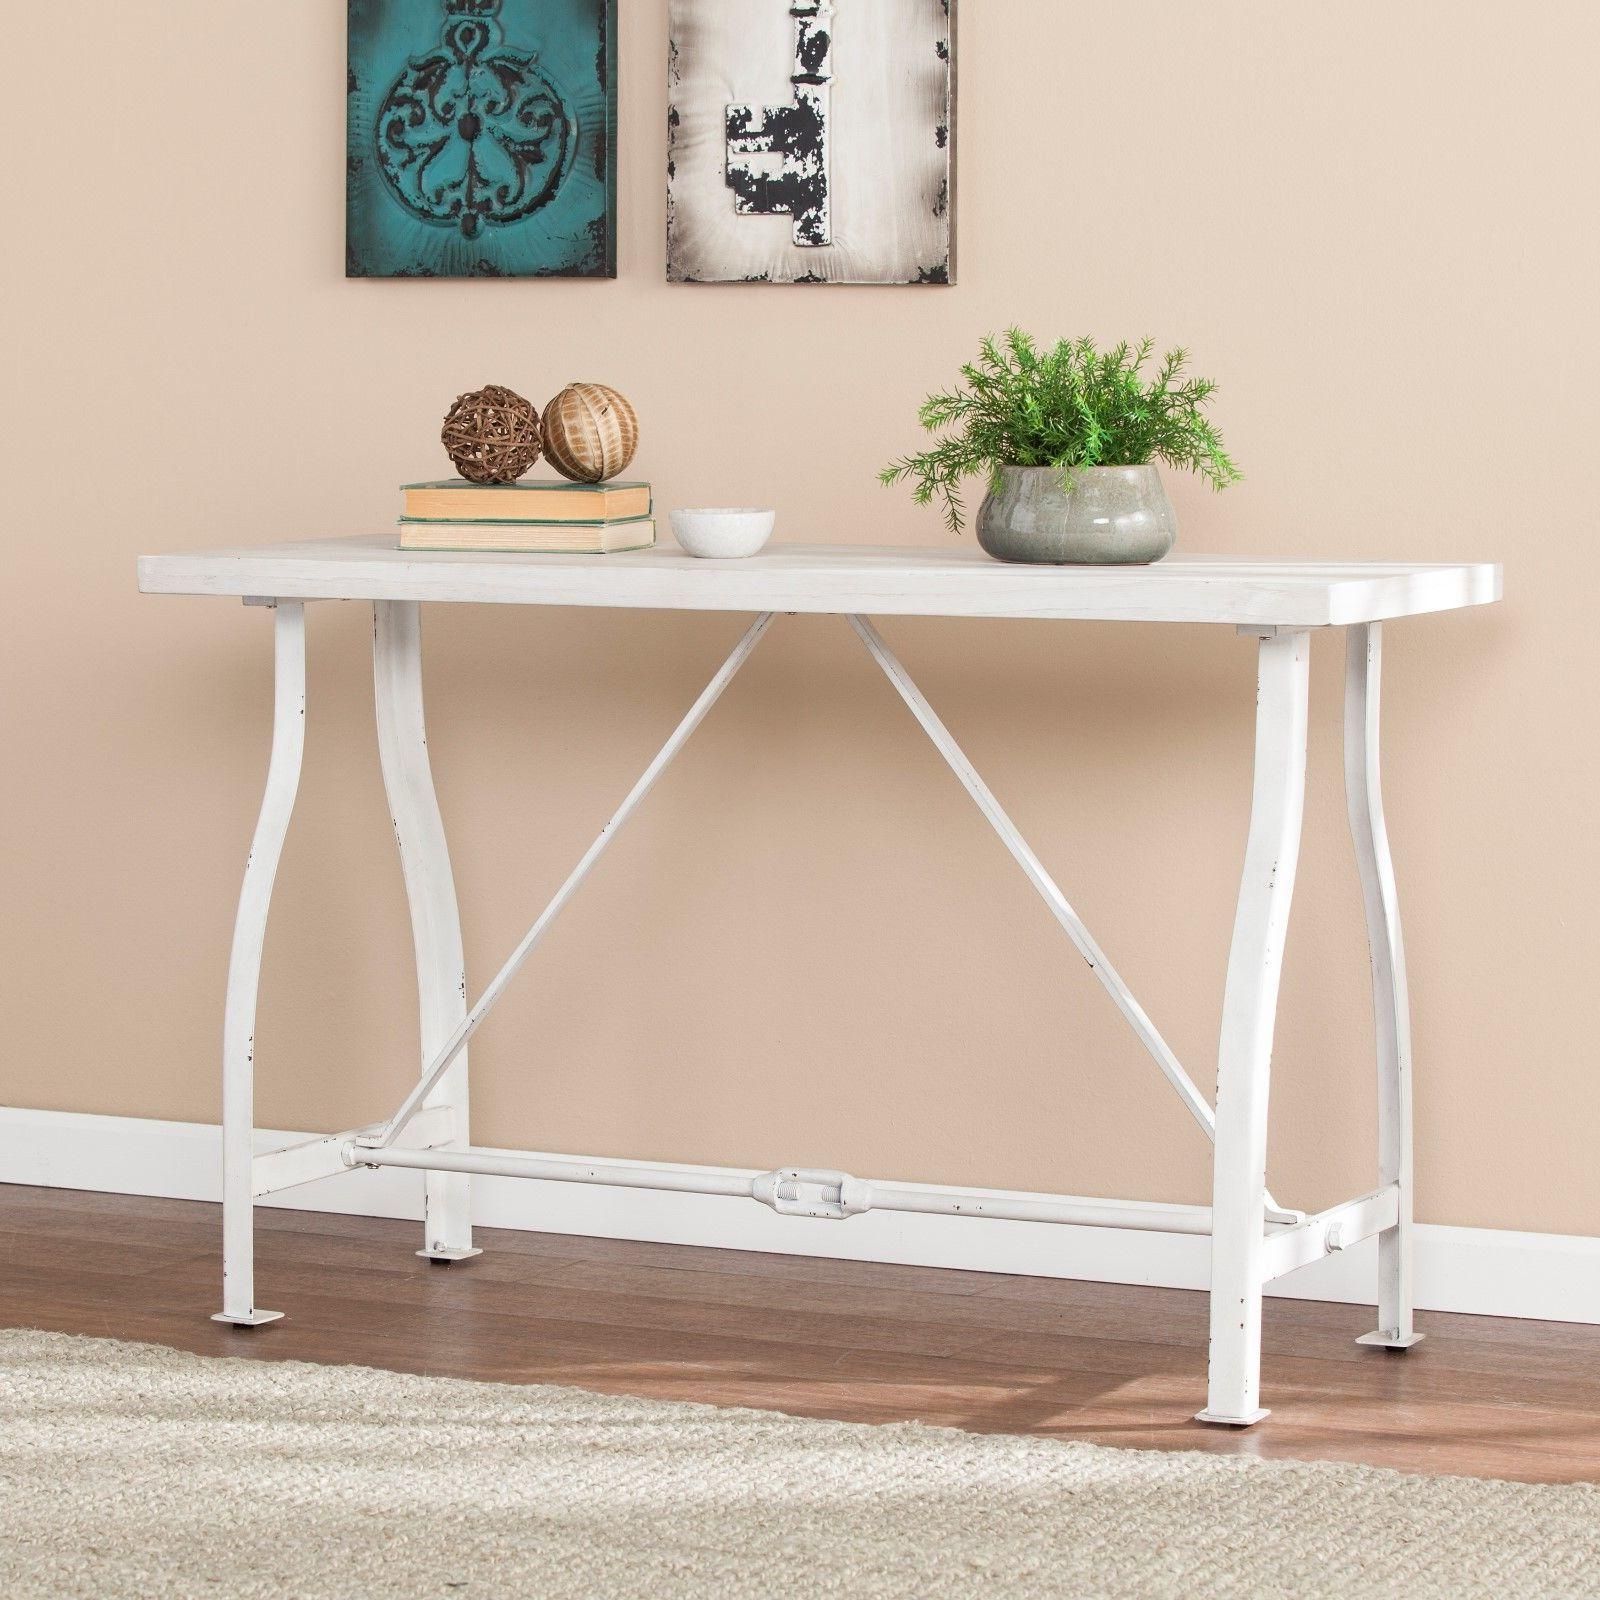 Cst45901 Farmhouse Style Console Table – Distressed White Within White Triangular Console Tables (View 12 of 20)